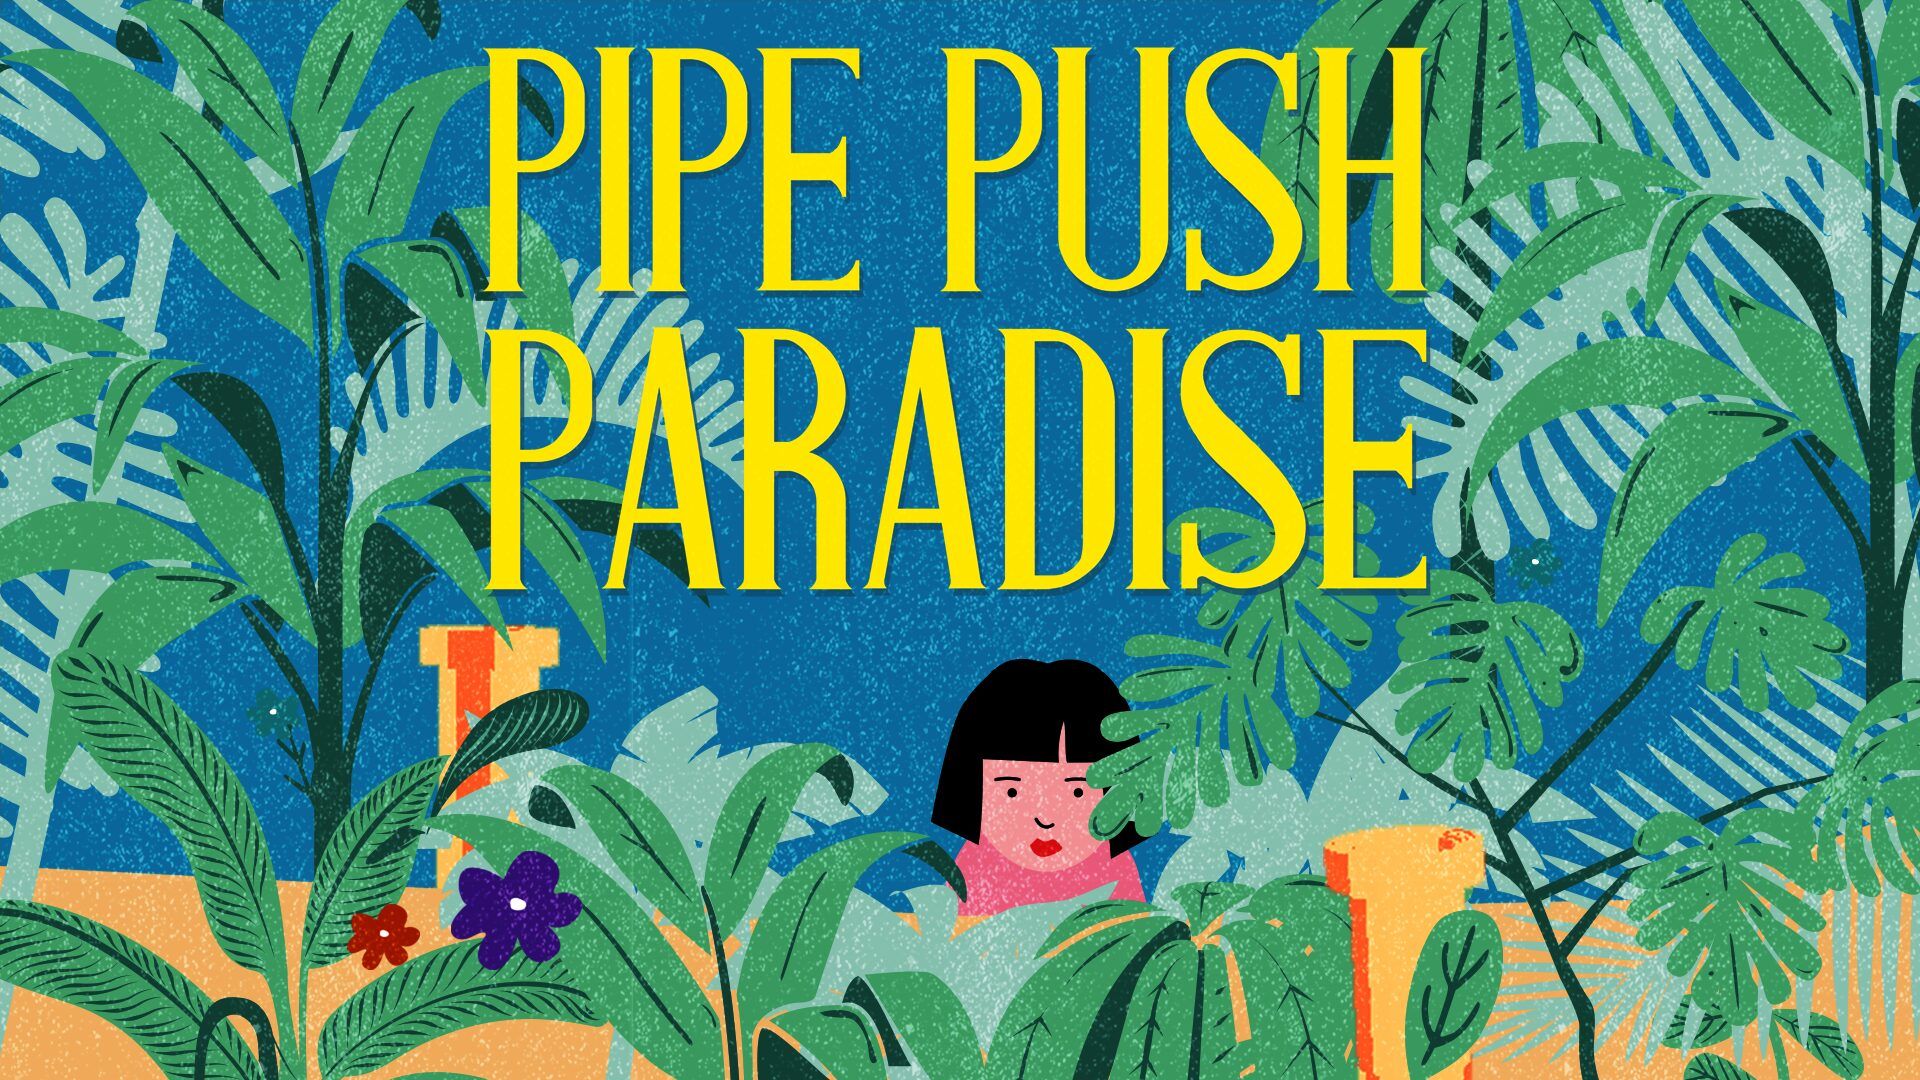 Pipe Push Paradise Trophies cover image